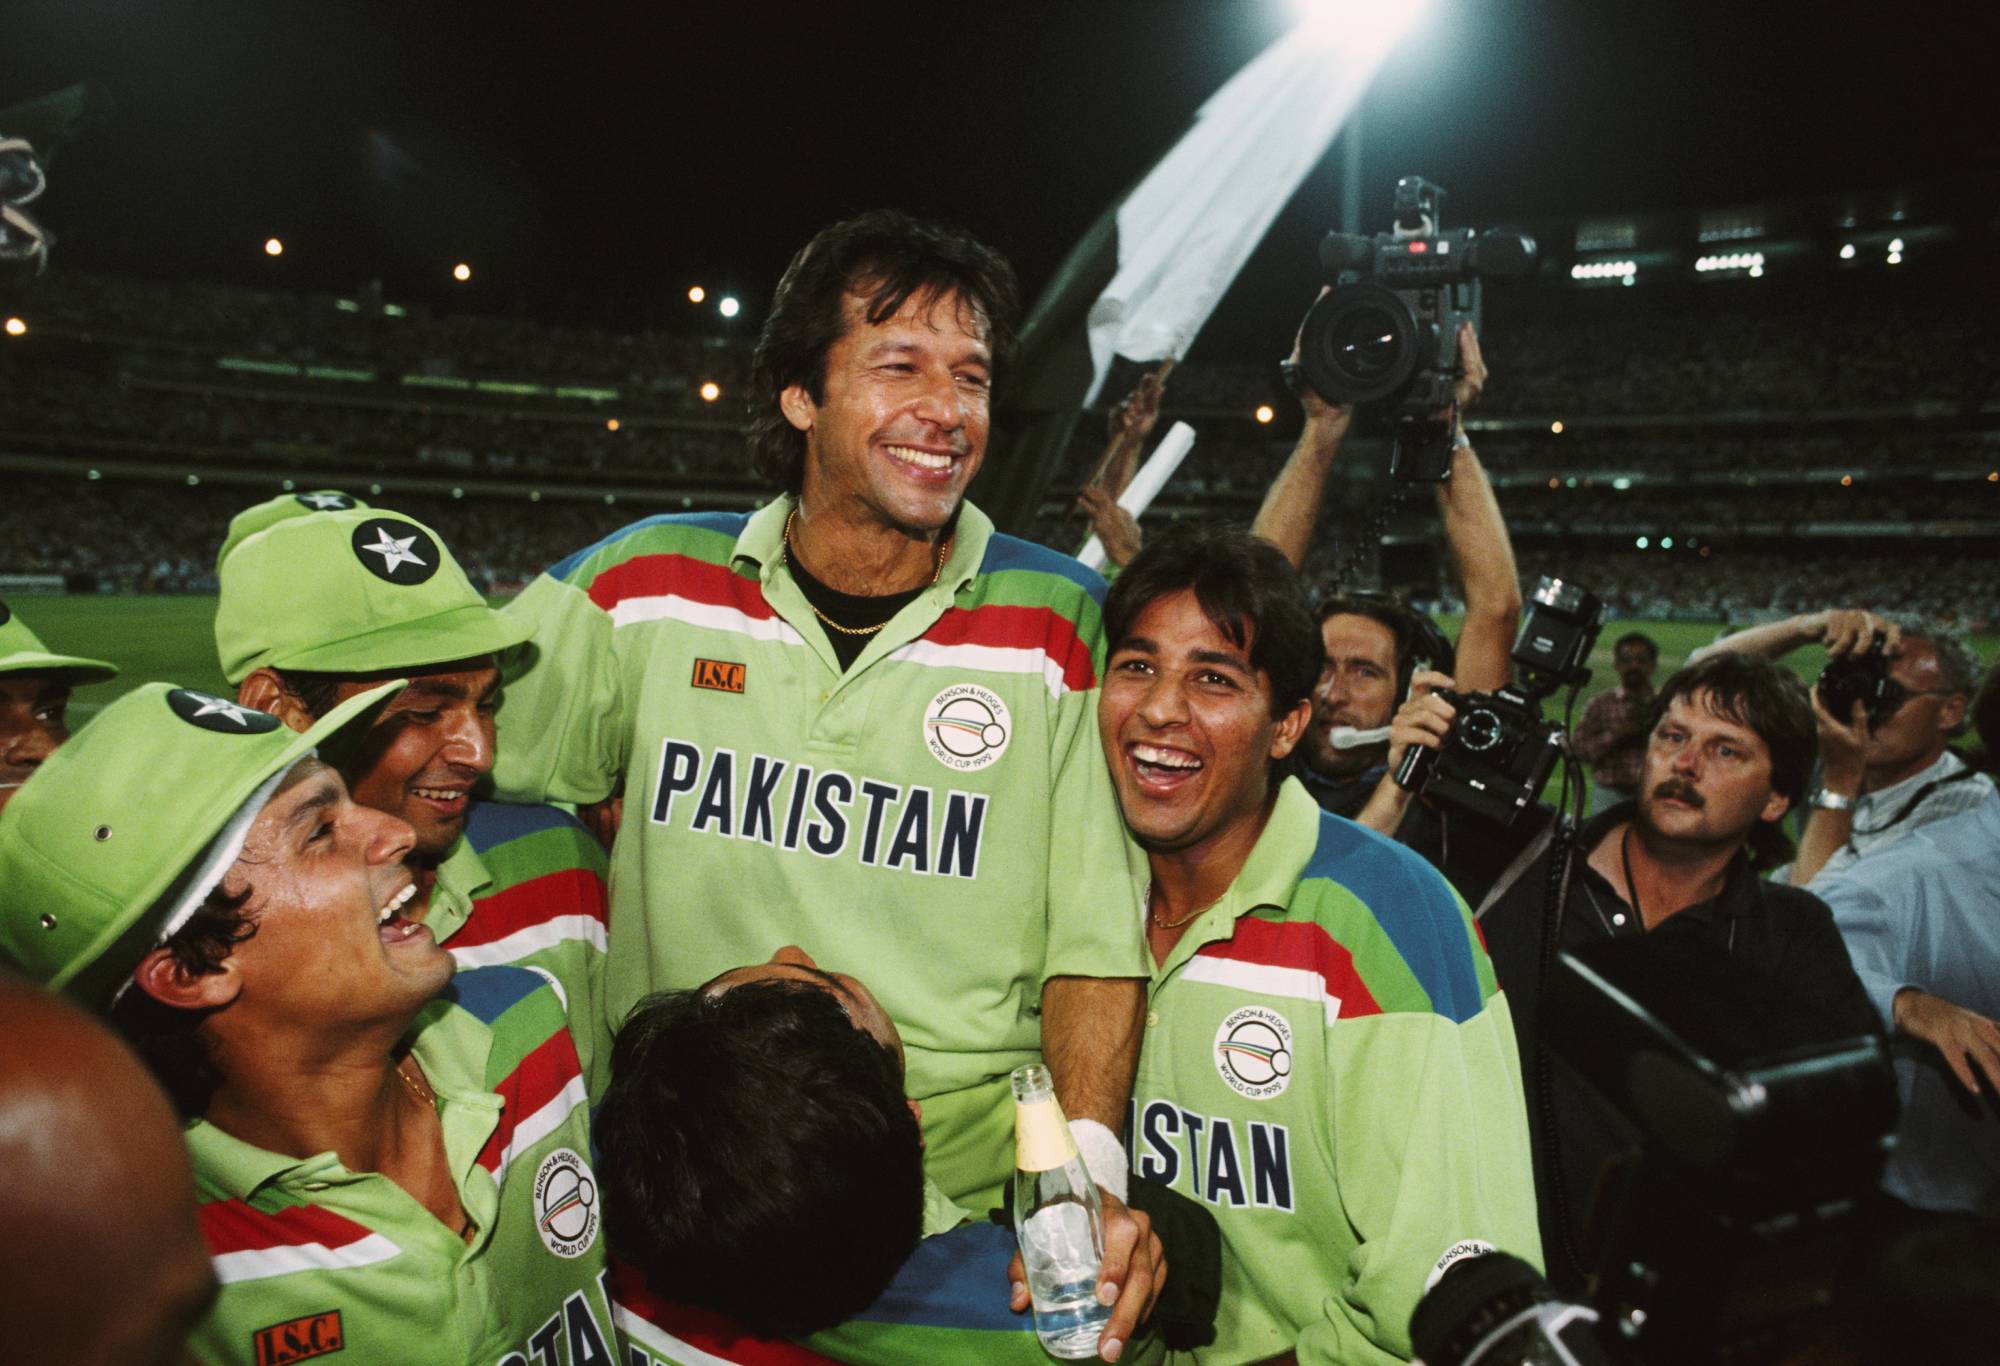 MELBOURNE, AUSTRALIA - MARCH 25: Pakistan captain Imran Khan (c) celebrates with team mates as photographer David Munden (r) looks on after the 1992 Cricket World Cup Final victory against England at MCG on March 25, 1992 in Melbourne, England. (Photo Tony Feder/Allsport/Getty Images)